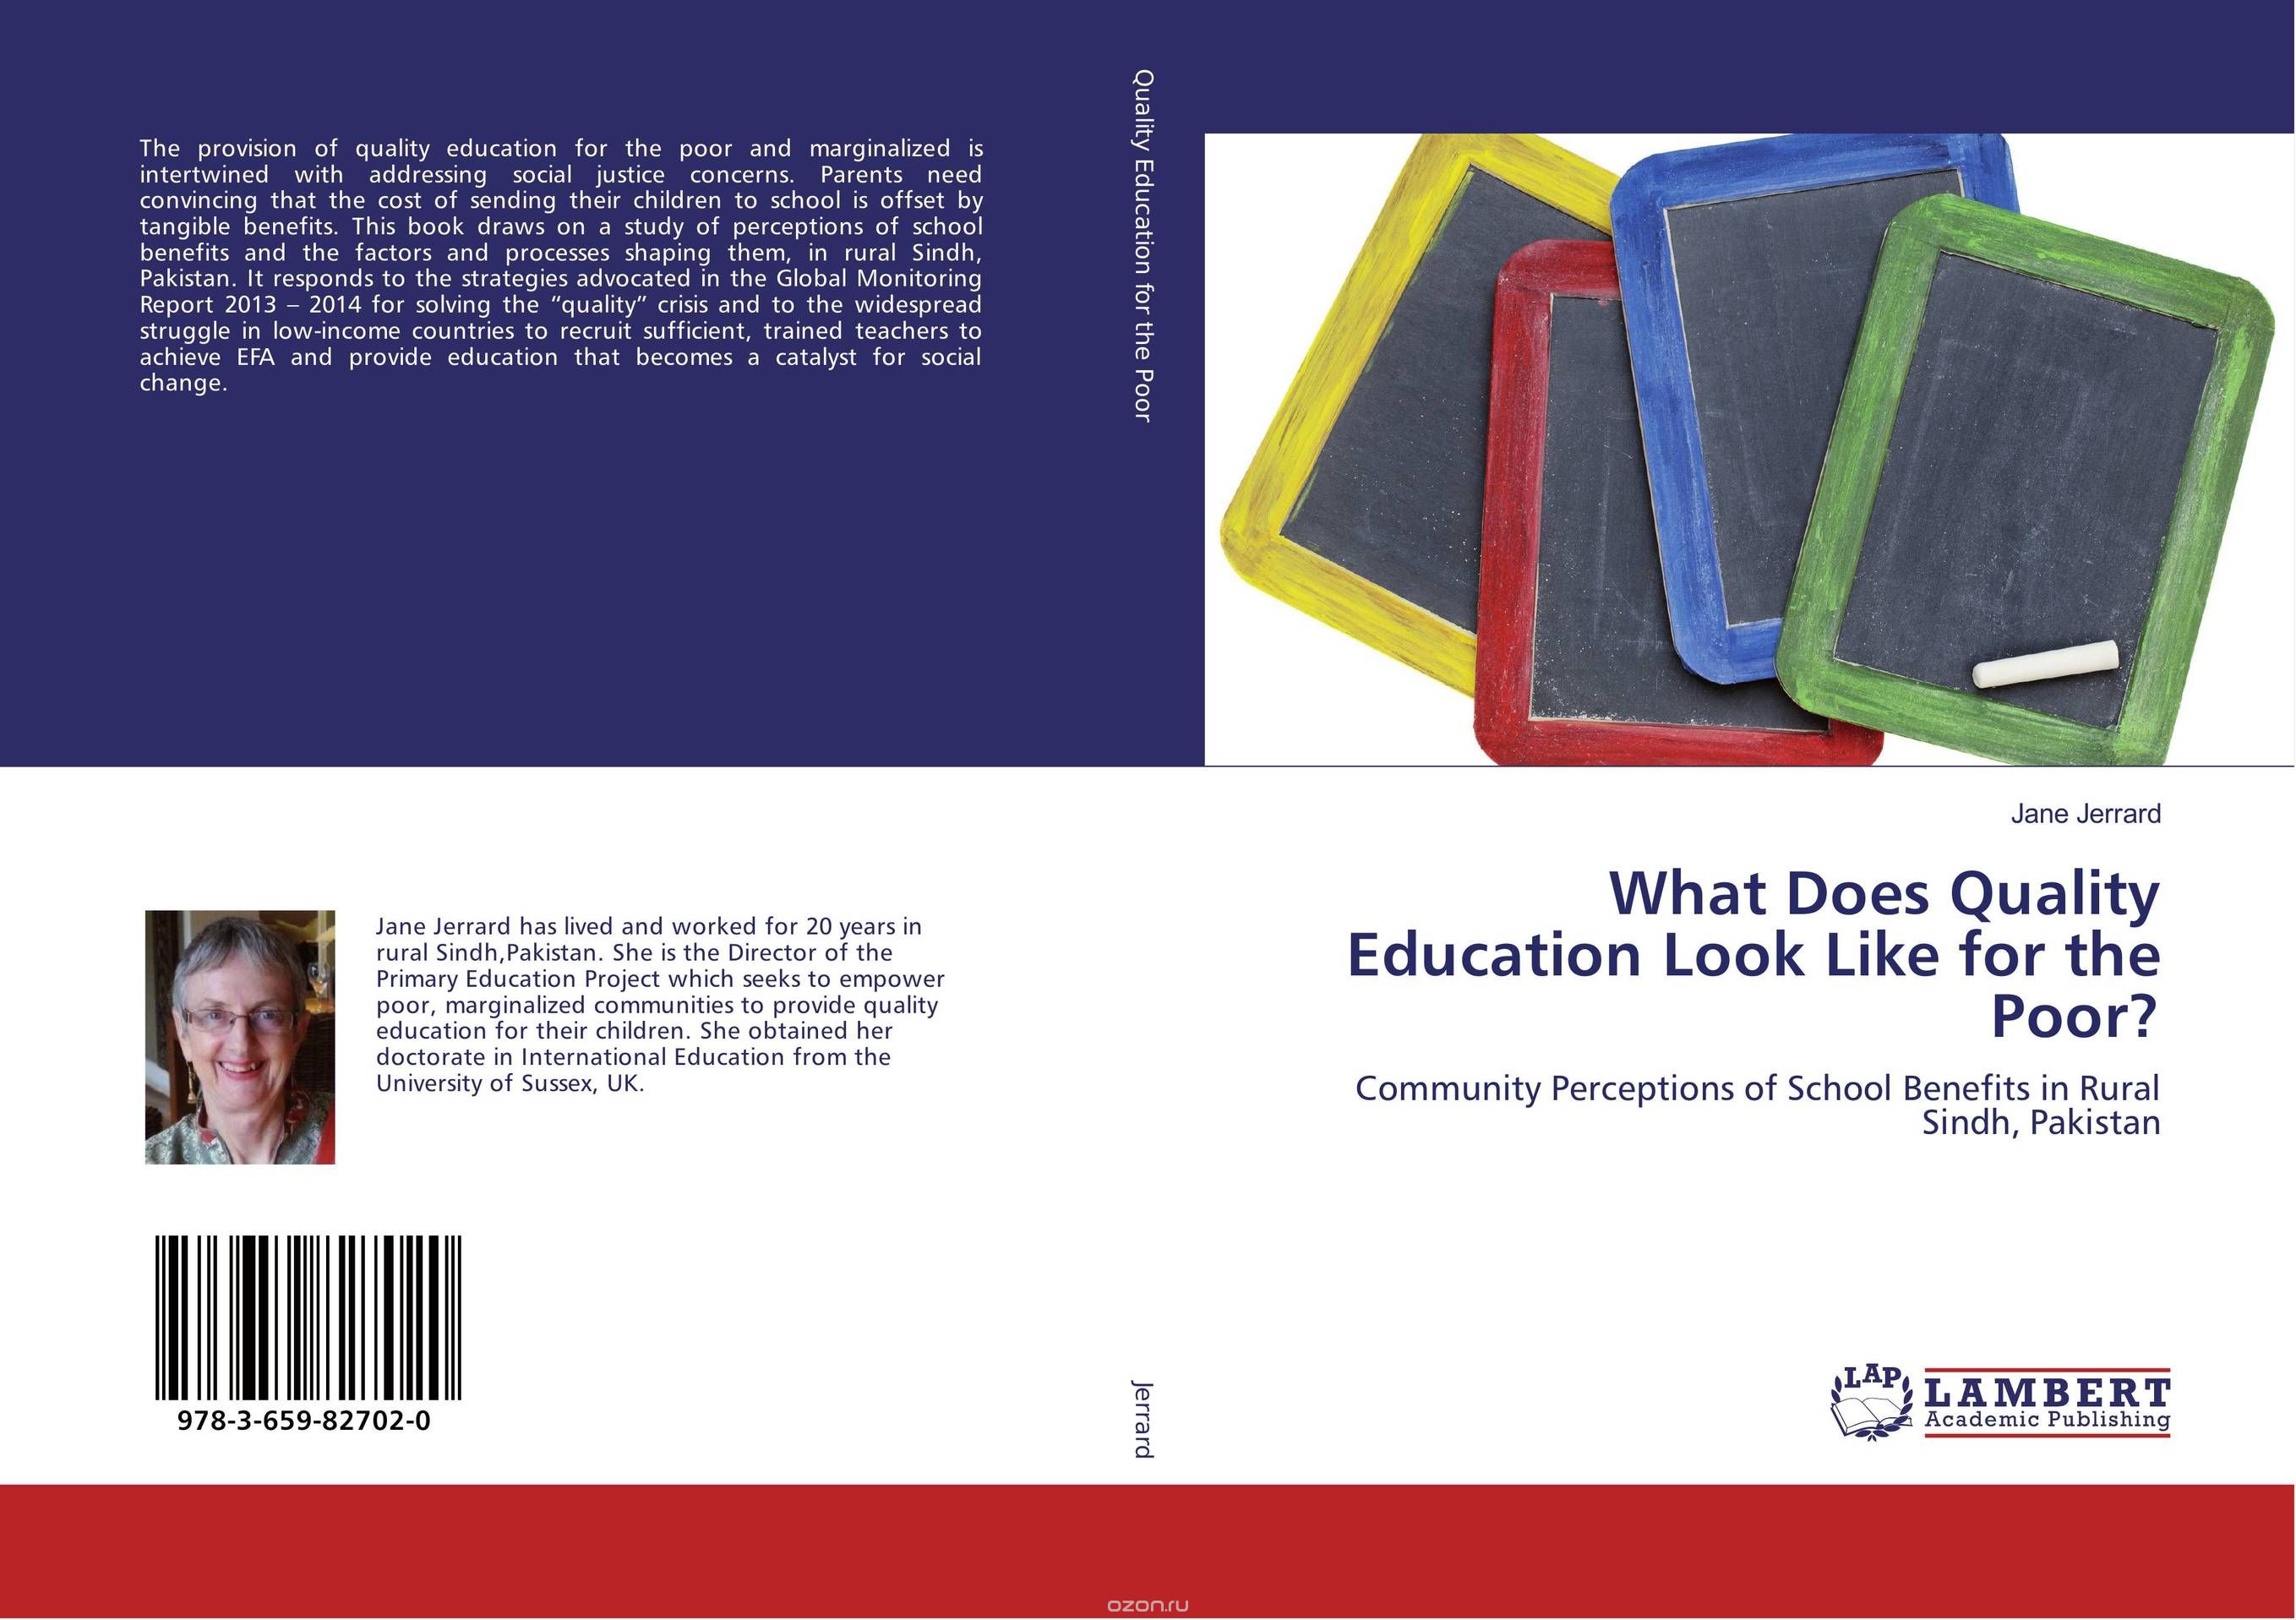 Скачать книгу "What Does Quality Education Look Like for the Poor?"